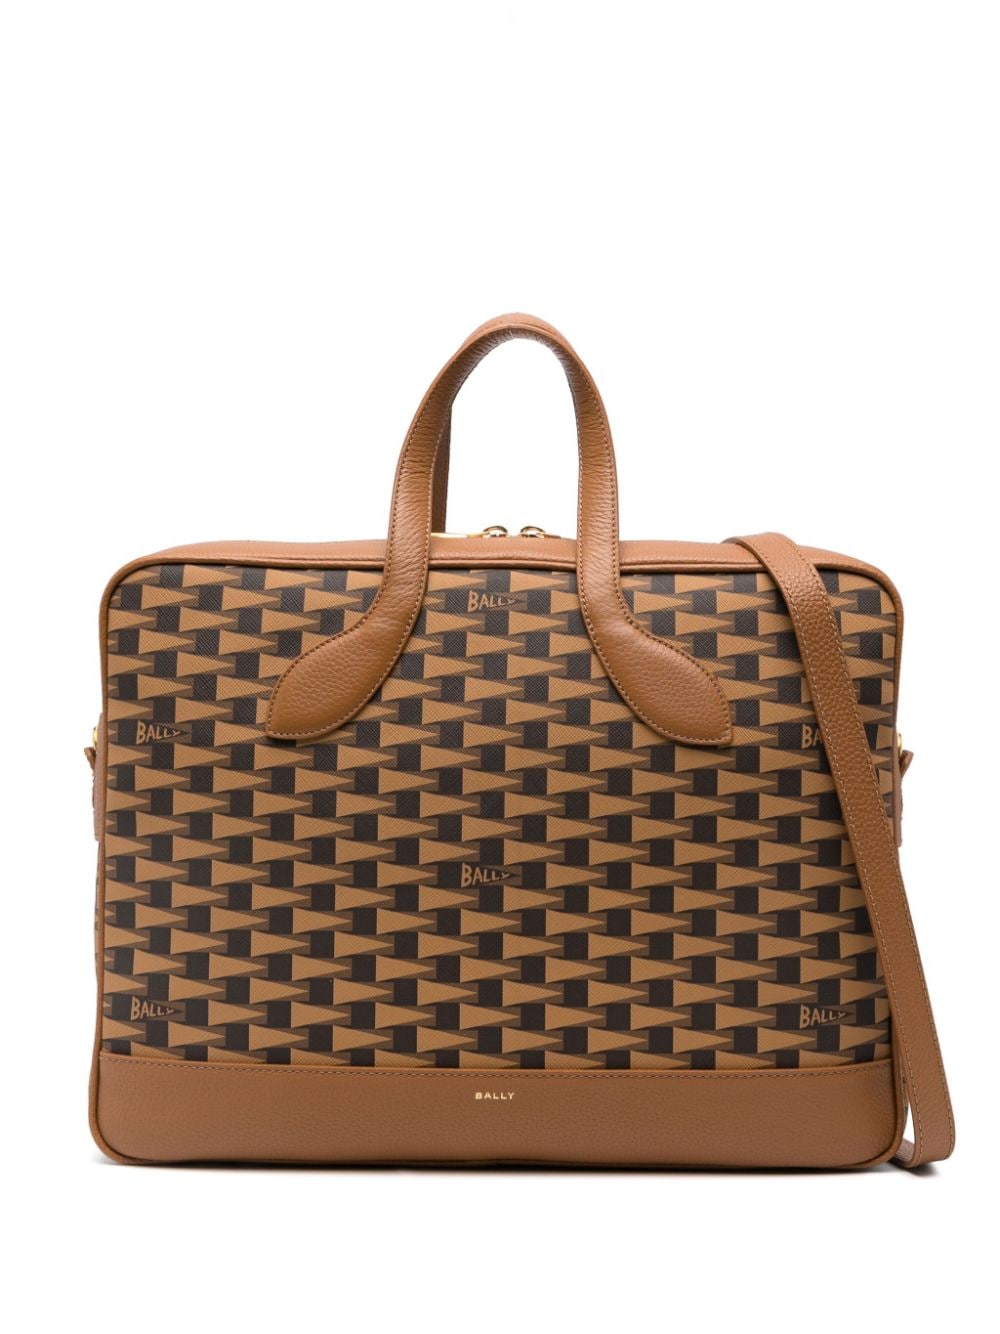 BALLY PENNANT LEATHER BRIEFCASE